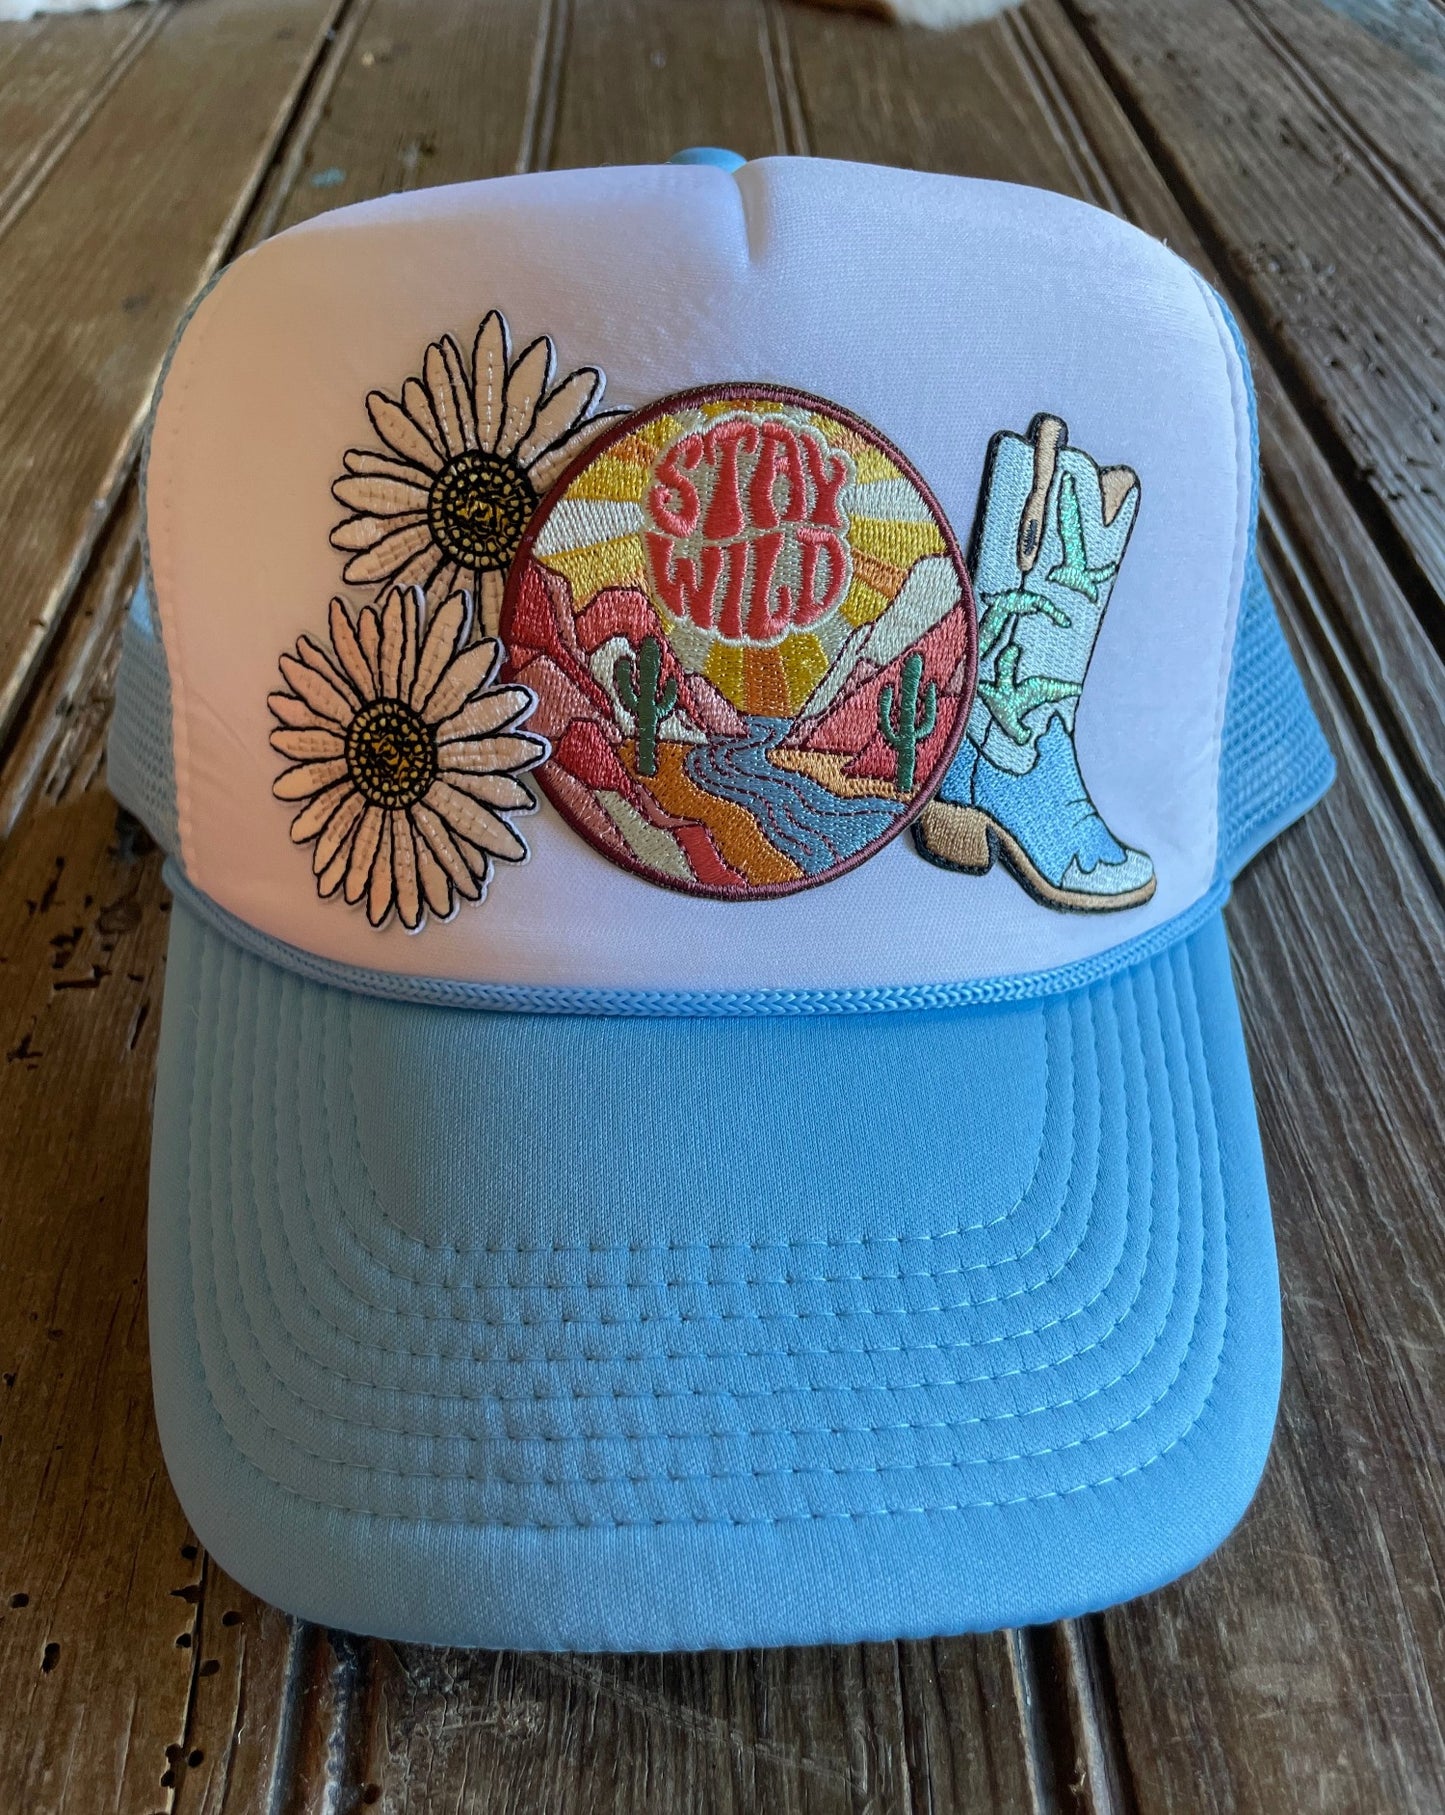 Front view of Stay Wild Daisy trucker hat with custom patches